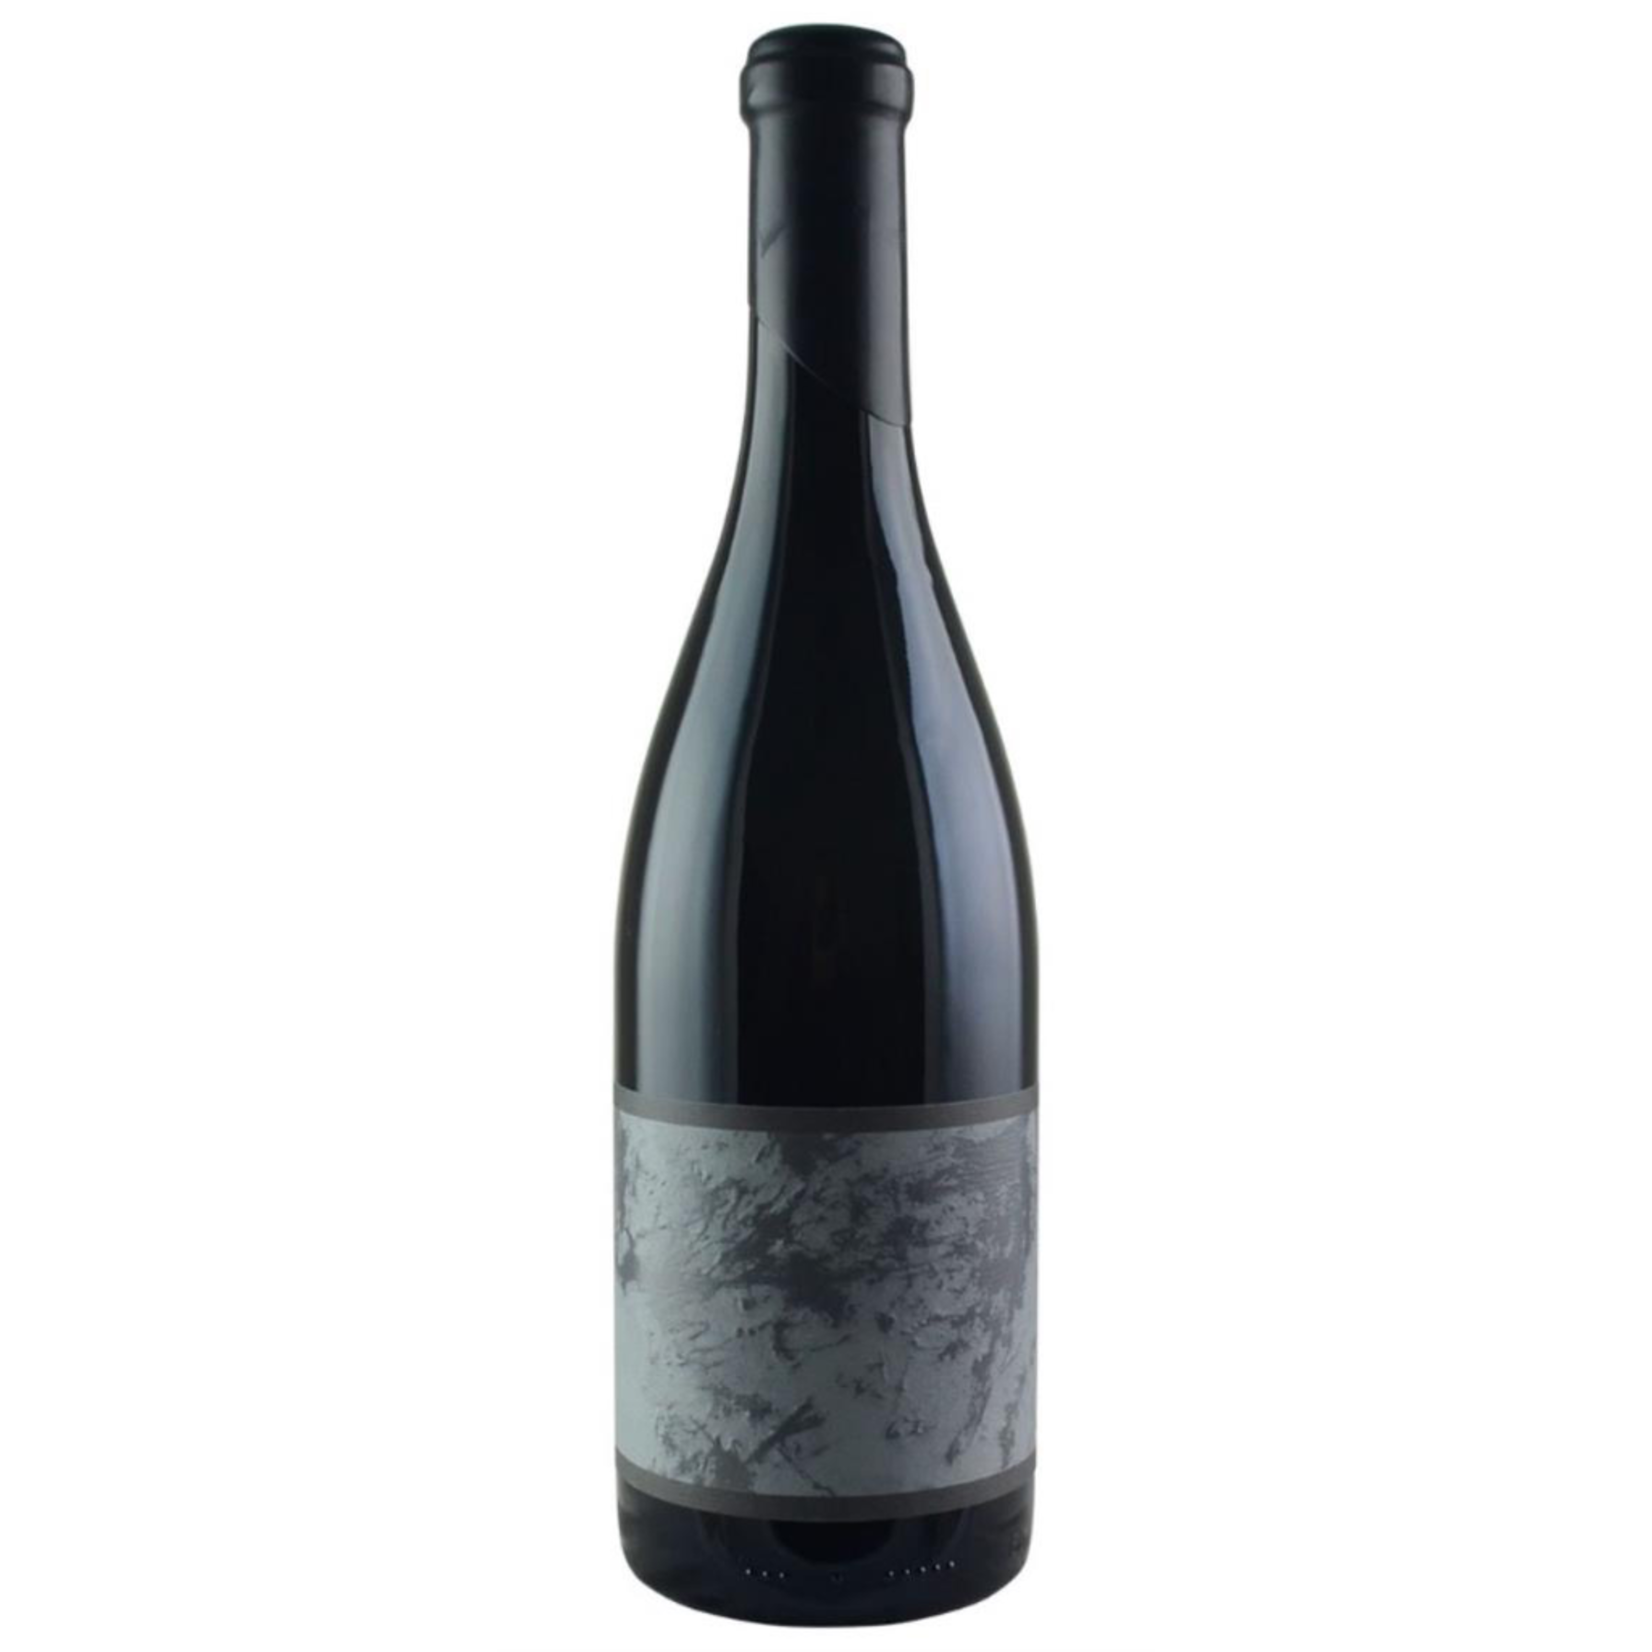 2016, Linne Calodo “Sticks And Stones” 74% Grenache, Red Blend, Willow Creek District, Paso Robles, California, 15.7% Alc, CT94